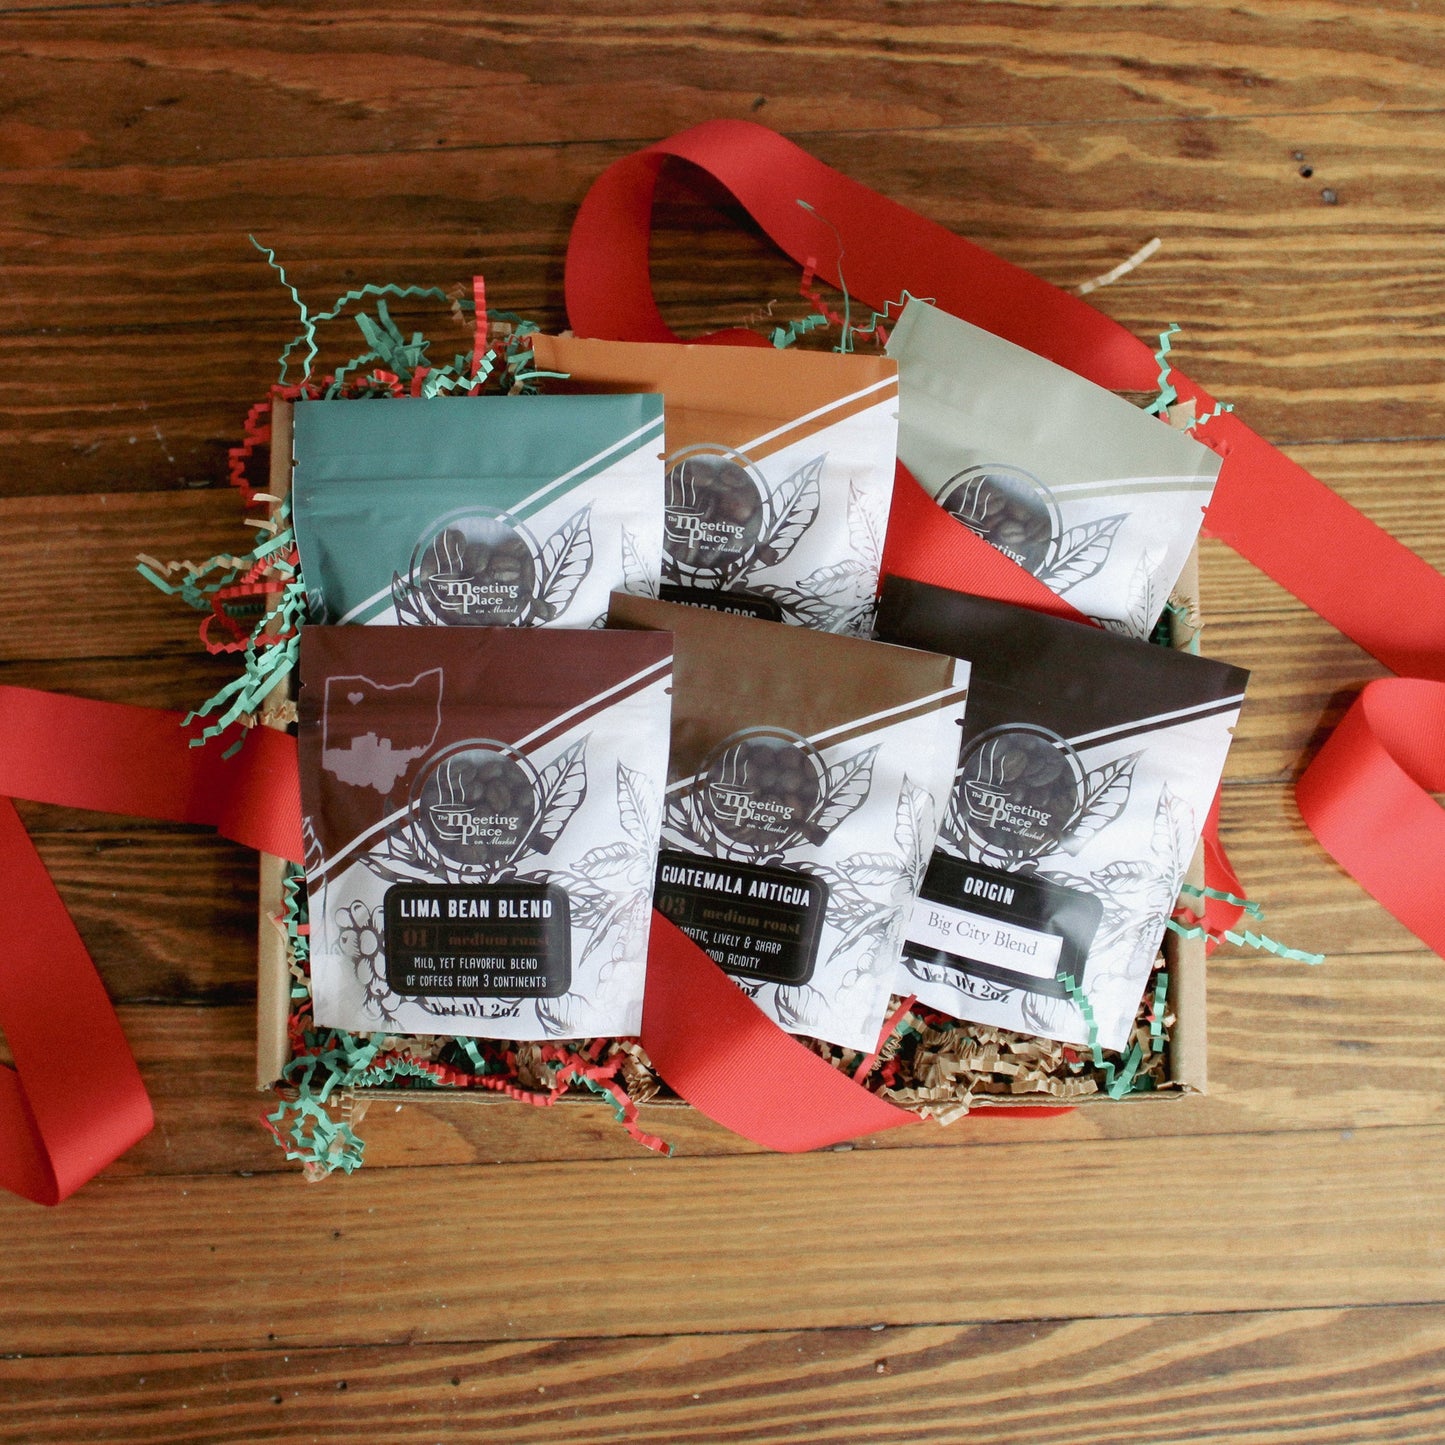 Coffee Gifts Set for Coffee Lovers - Coffee Sampler Gift Set for Women and Men - Ground Coffee Gift Basket for Christmas - Pack of 8 Holiday